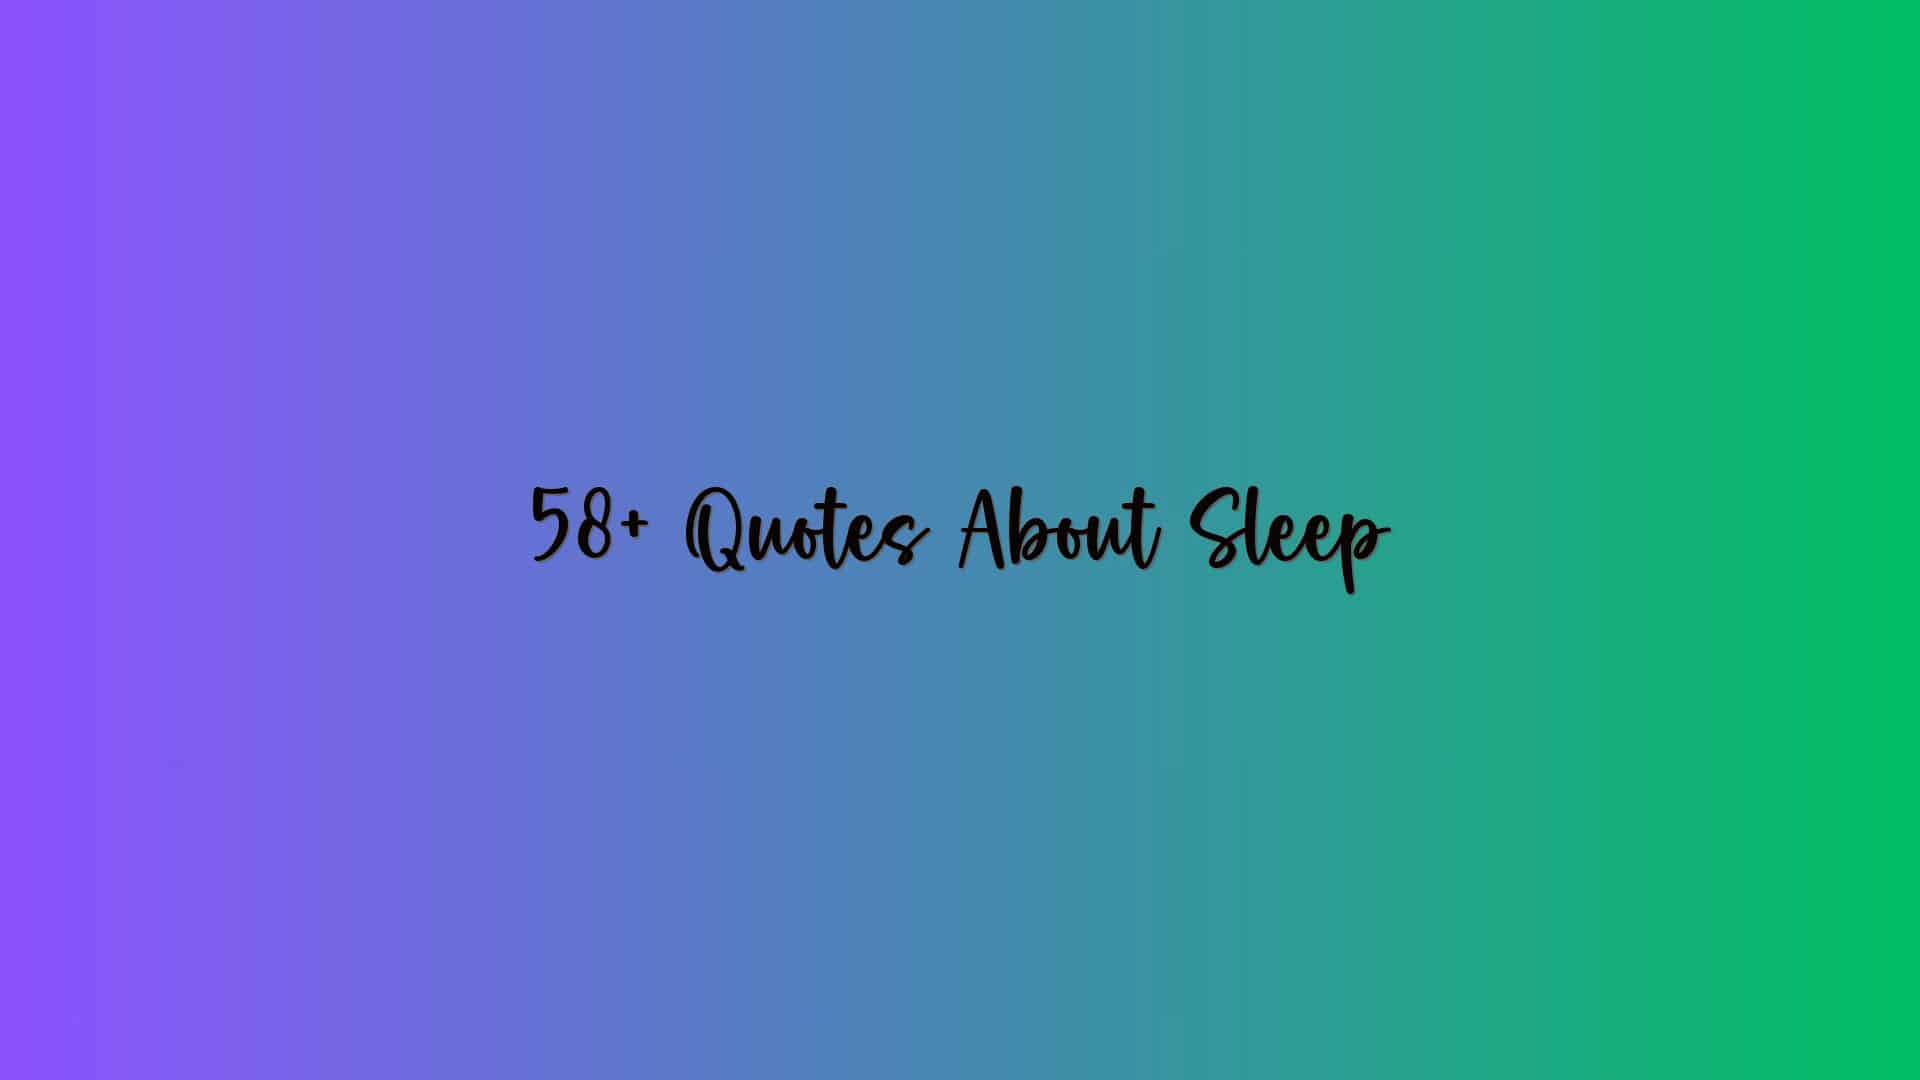 58+ Quotes About Sleep